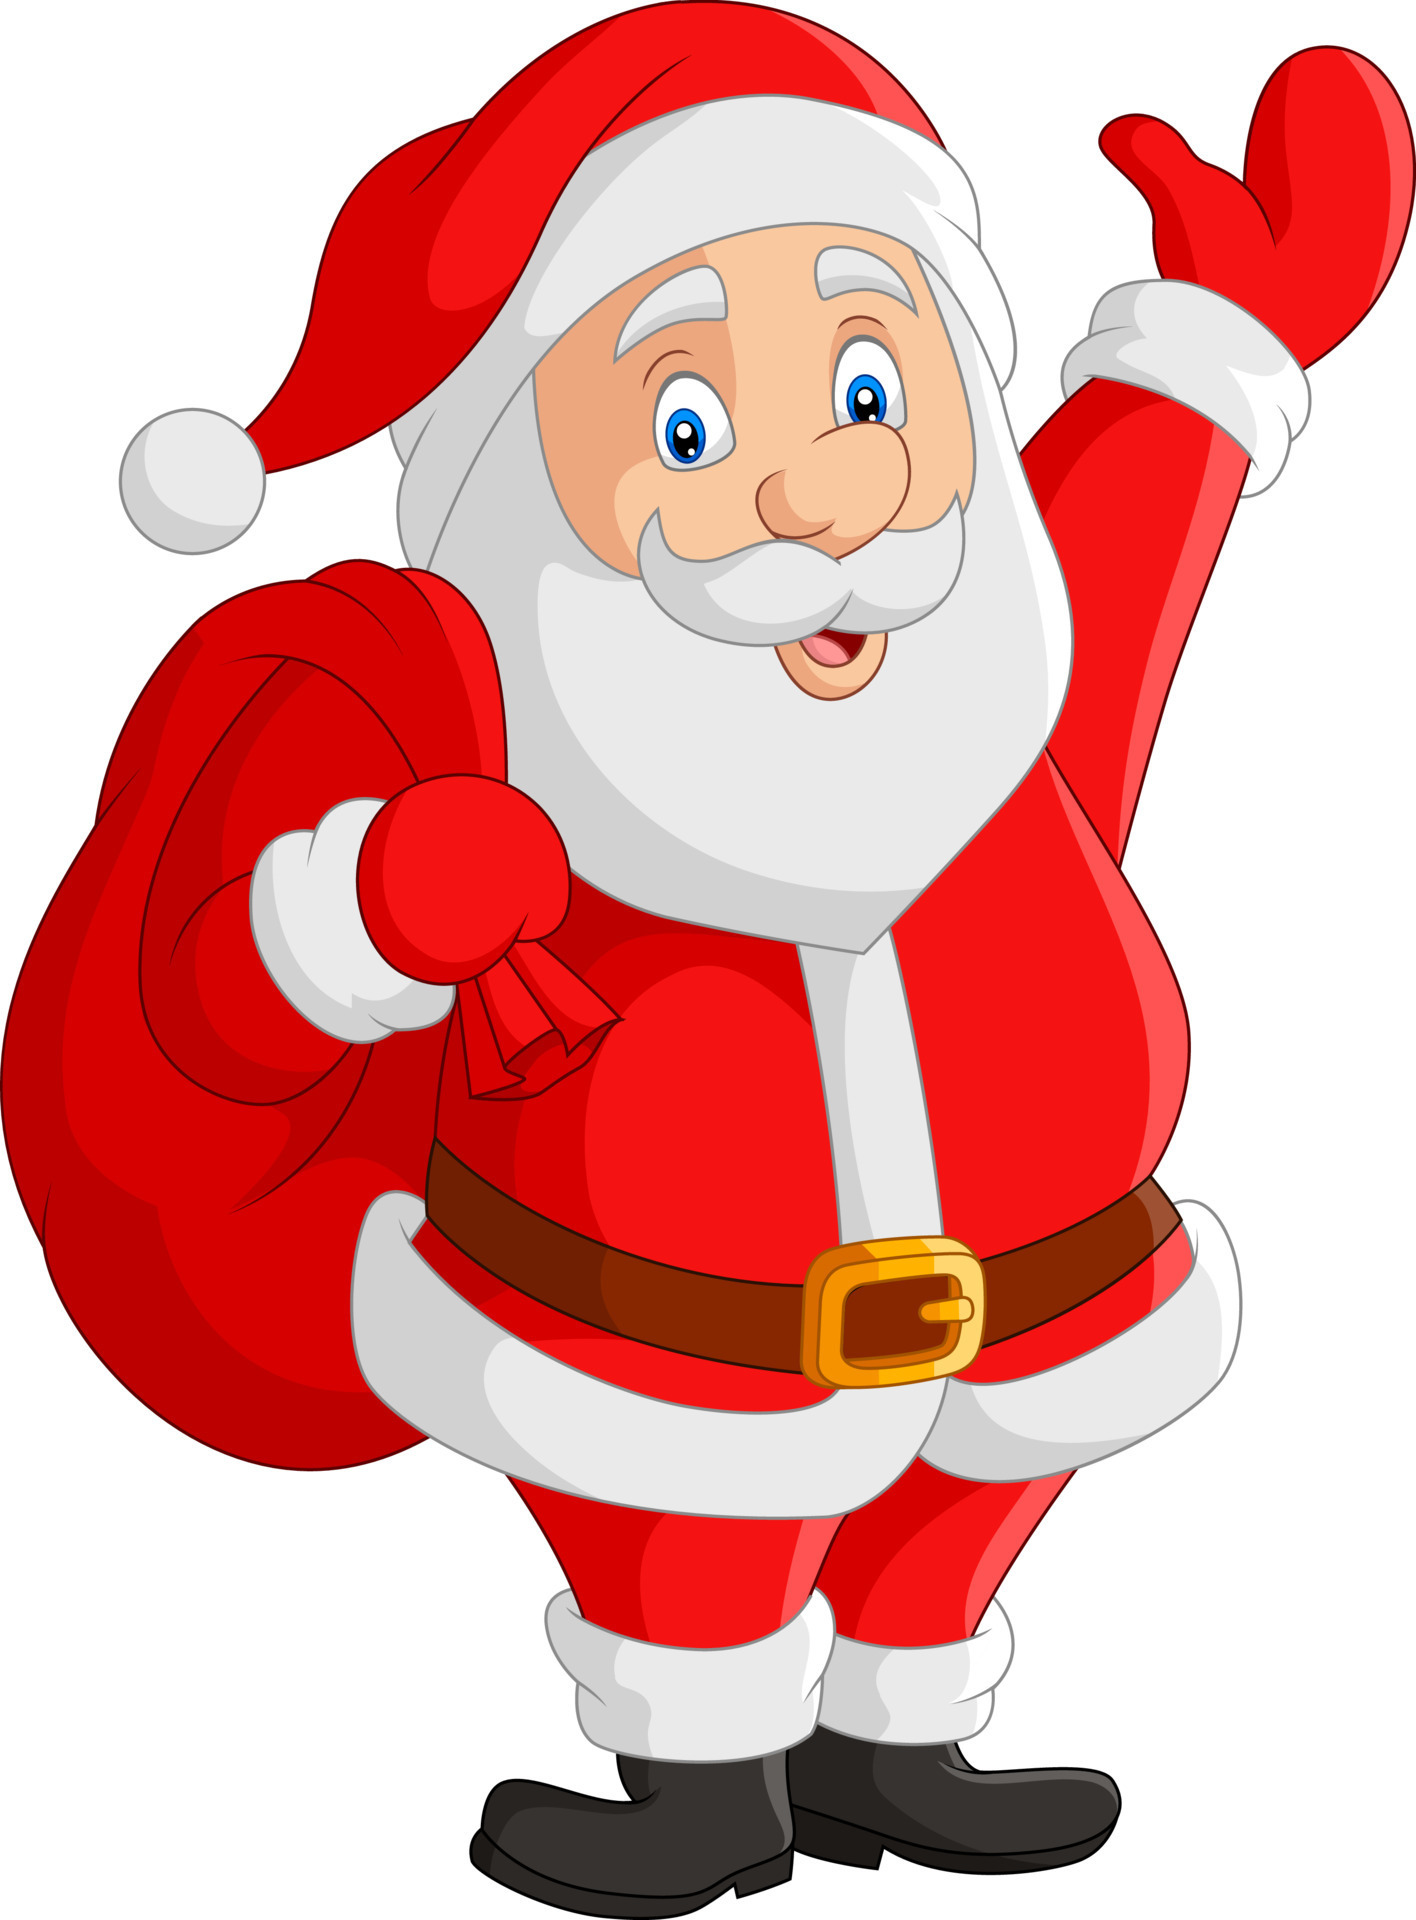 Santa Claus Cartoon Vector Art, Icons, and Graphics for Free Download